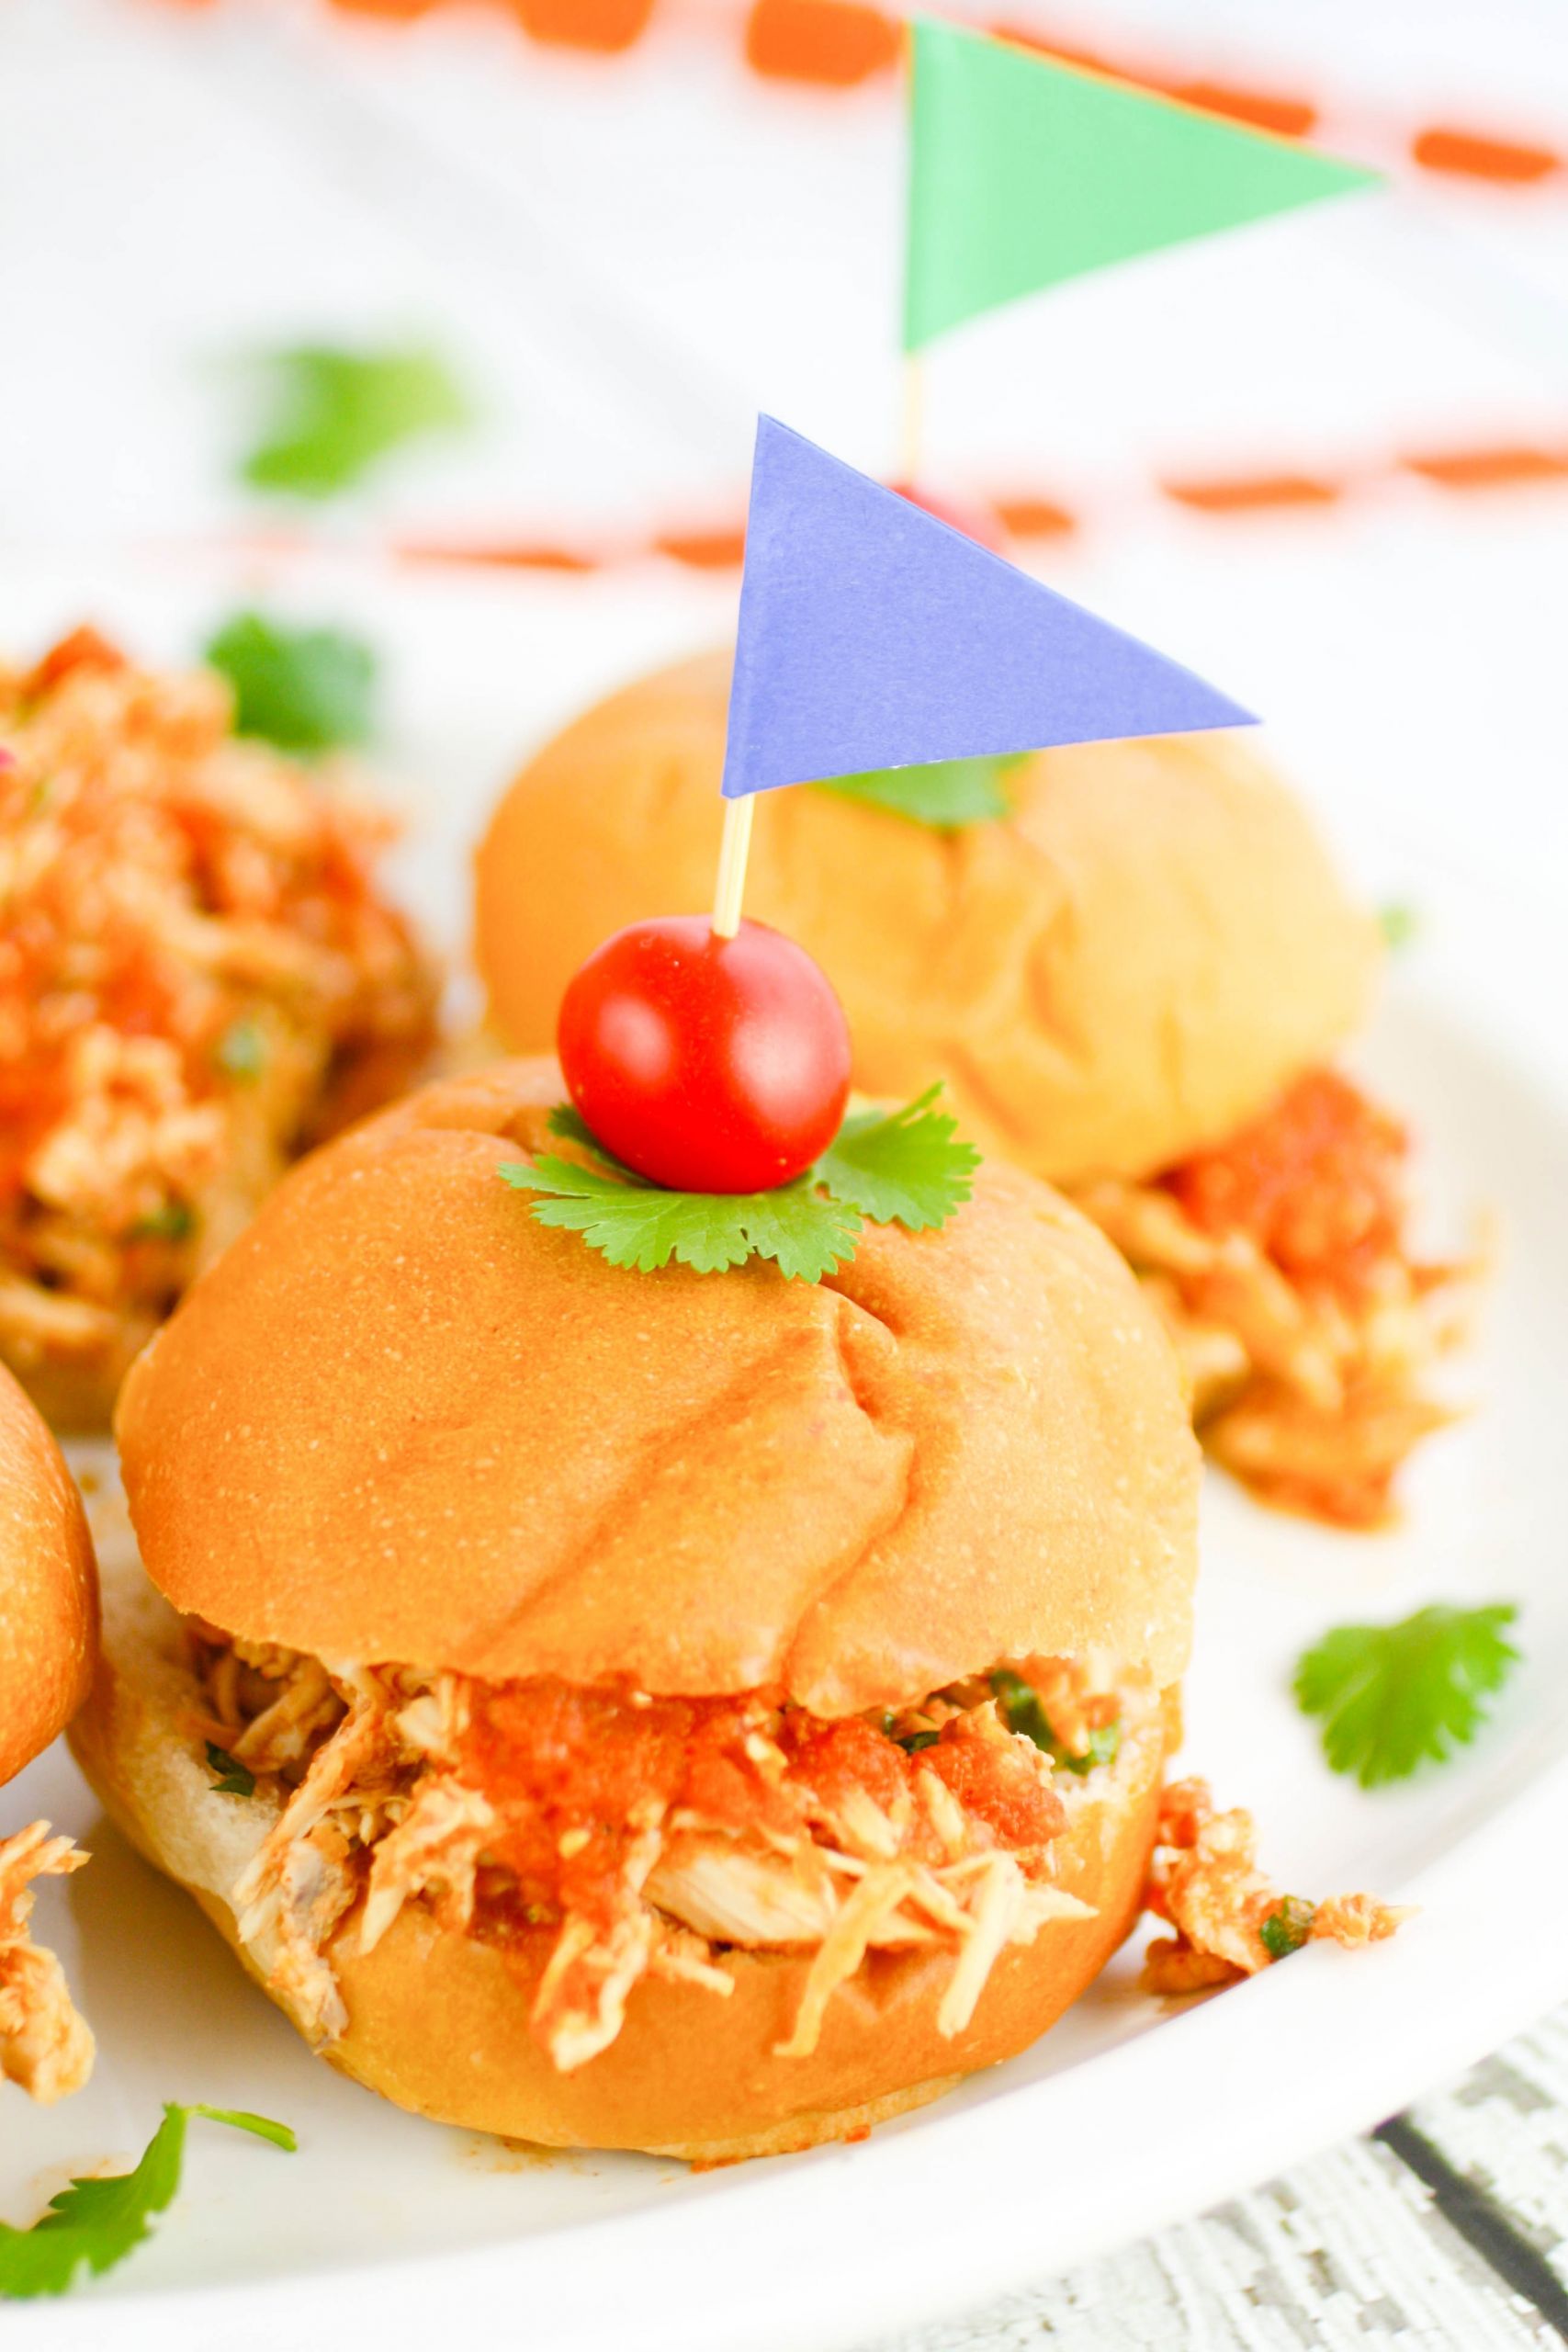 Slow Cooker Pulled Chicken Sandwiches
 Slow Cooker Southwestern Pulled Chicken Sandwiches